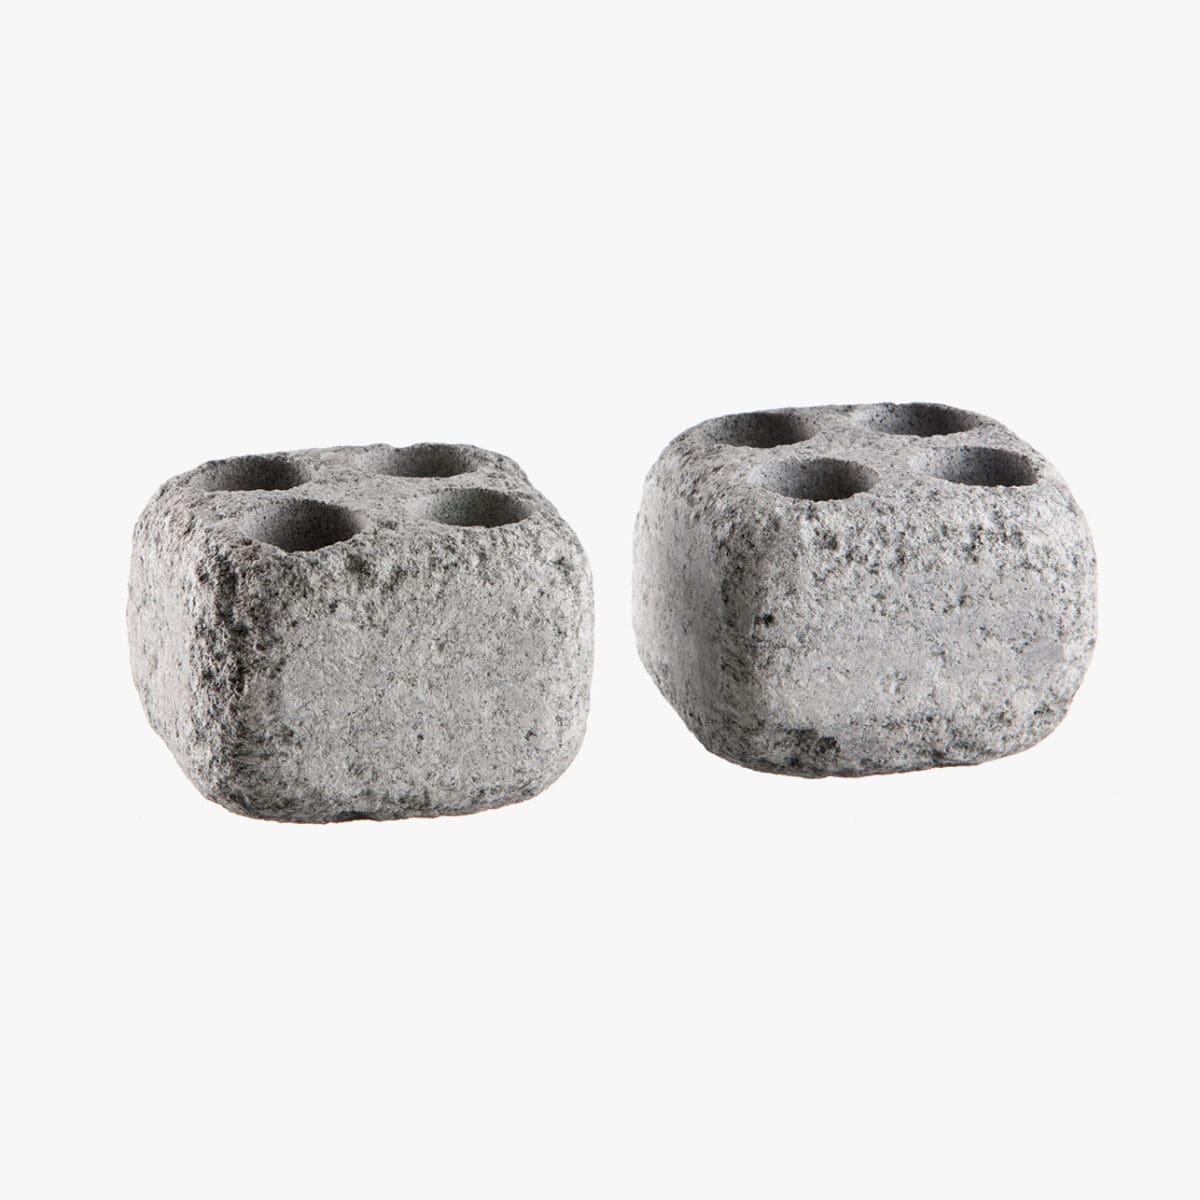 Image of 2 cube stones with 4 holes in each top